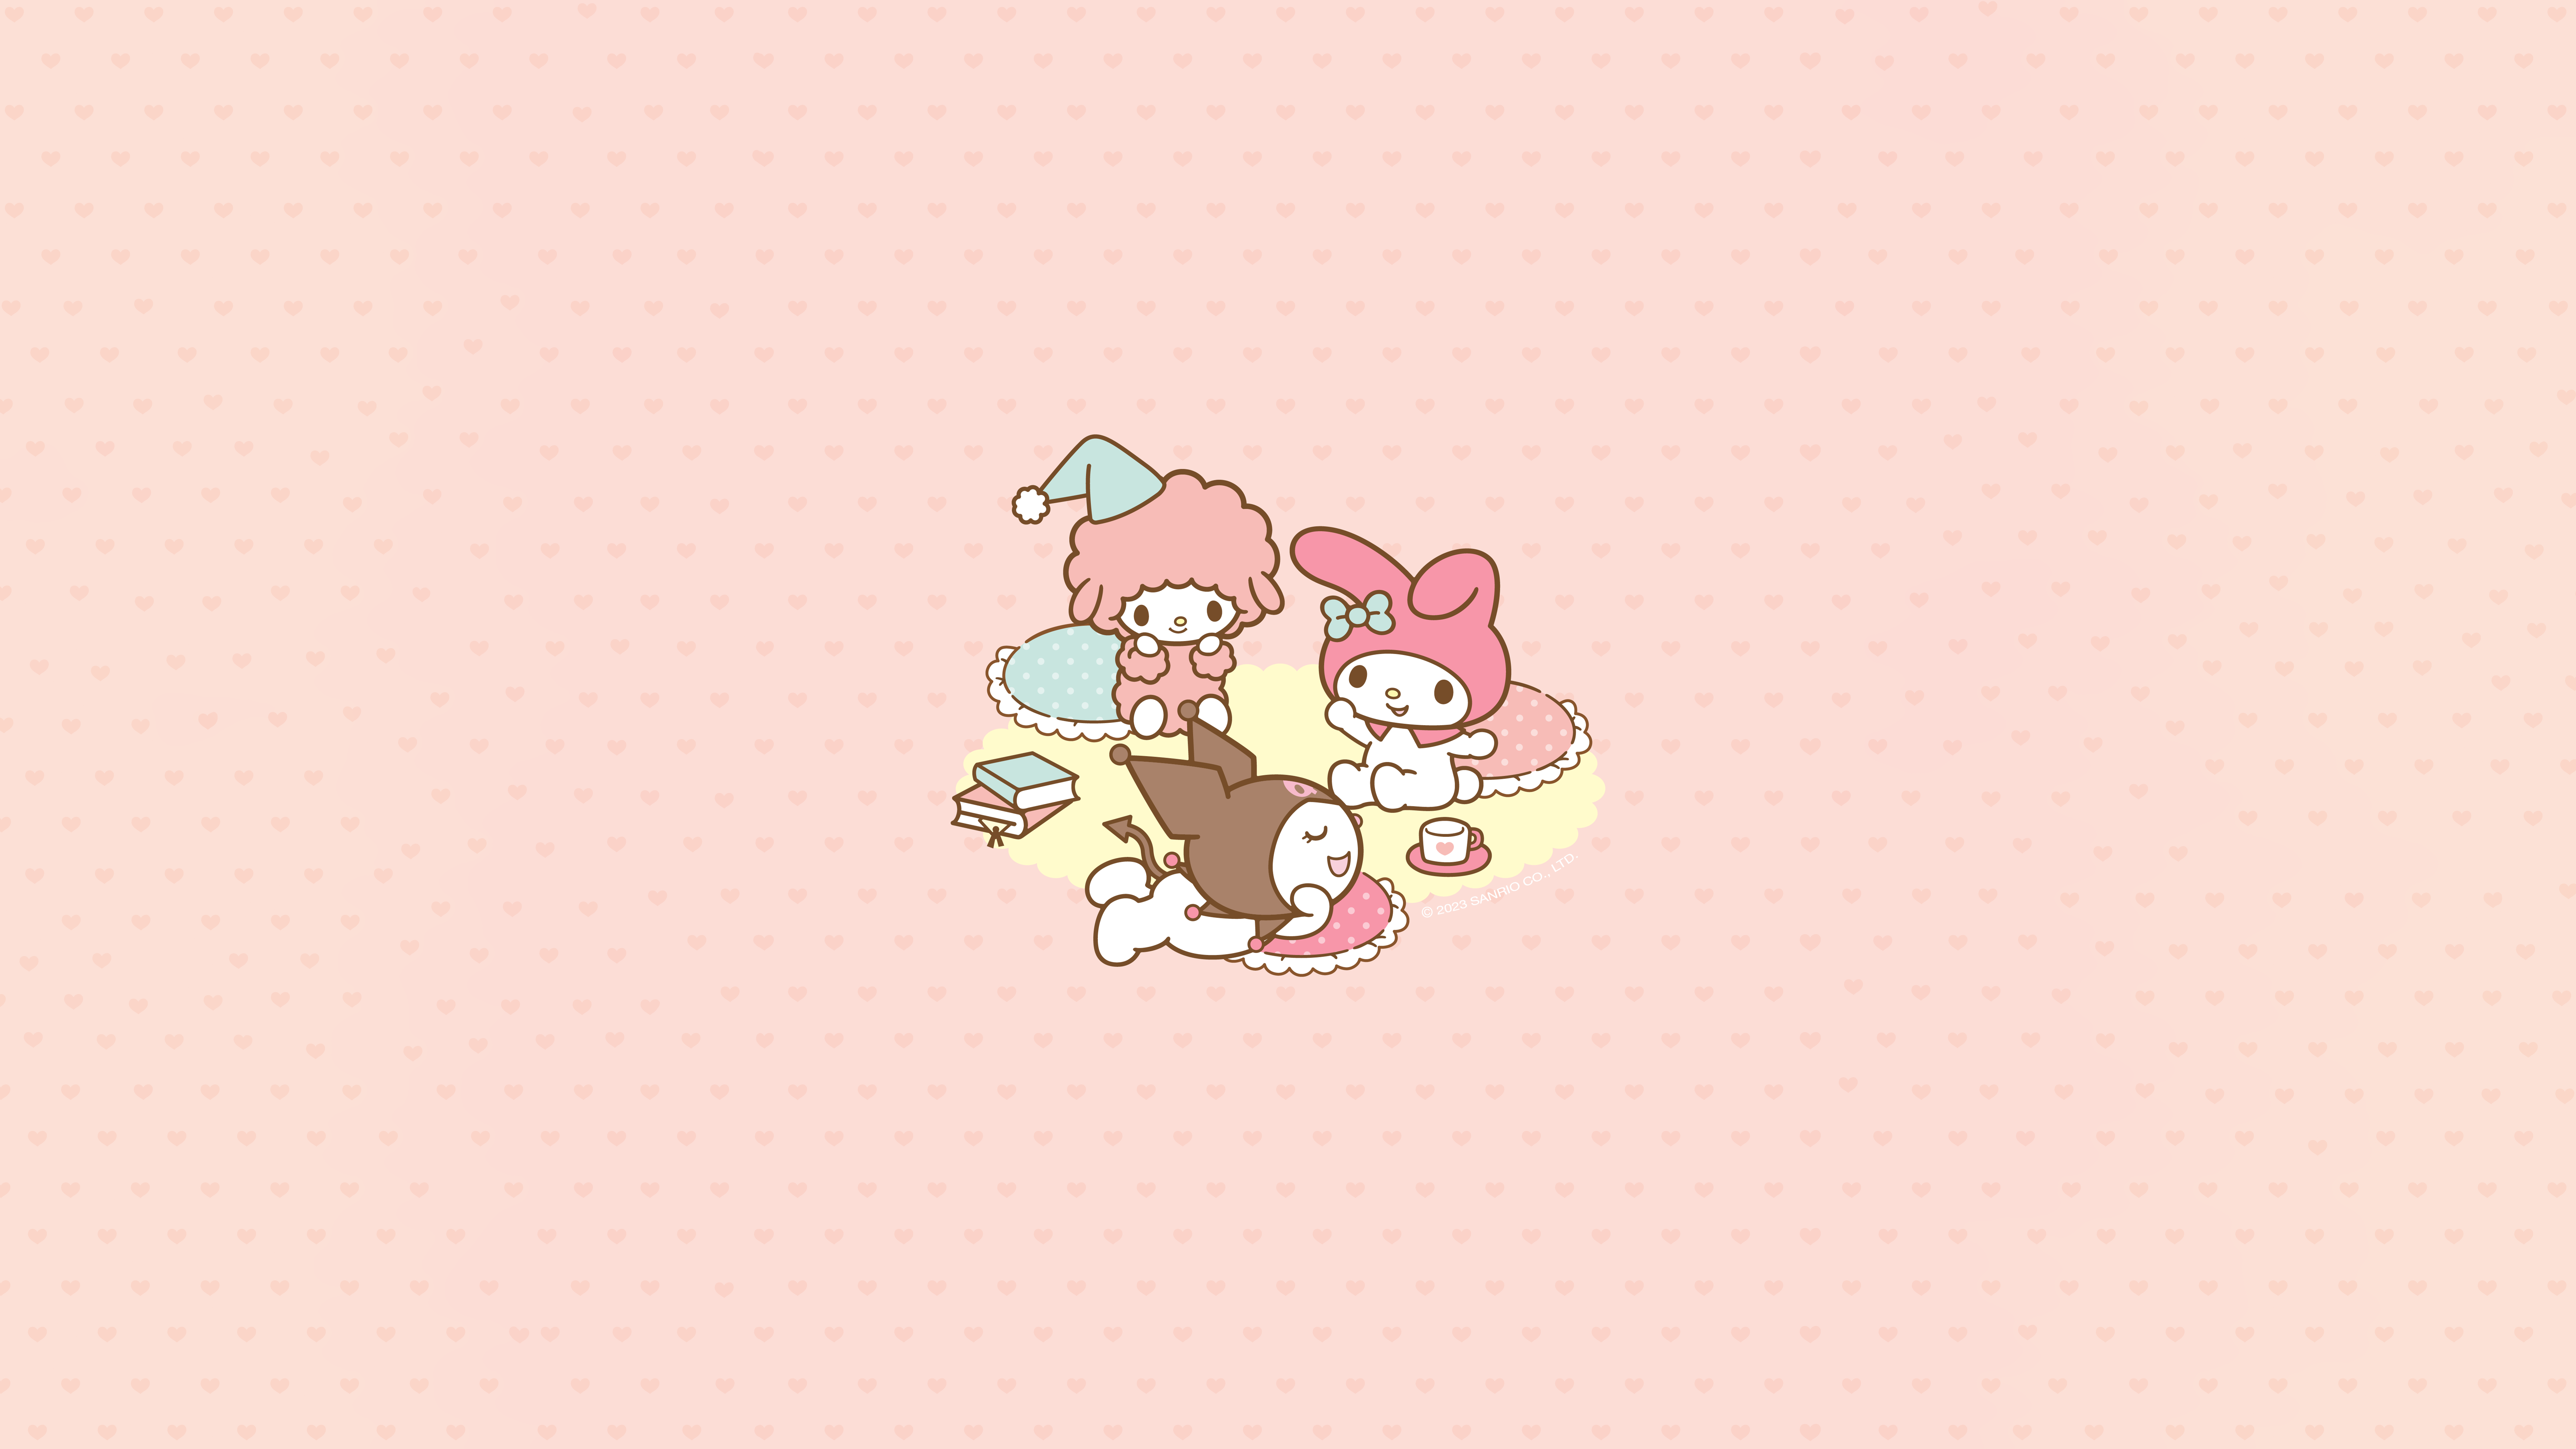 HD desktop wallpaper featuring Sanrio characters My Melody and Kuromi from Onegai My Melody, with a soft pink polka dot background.